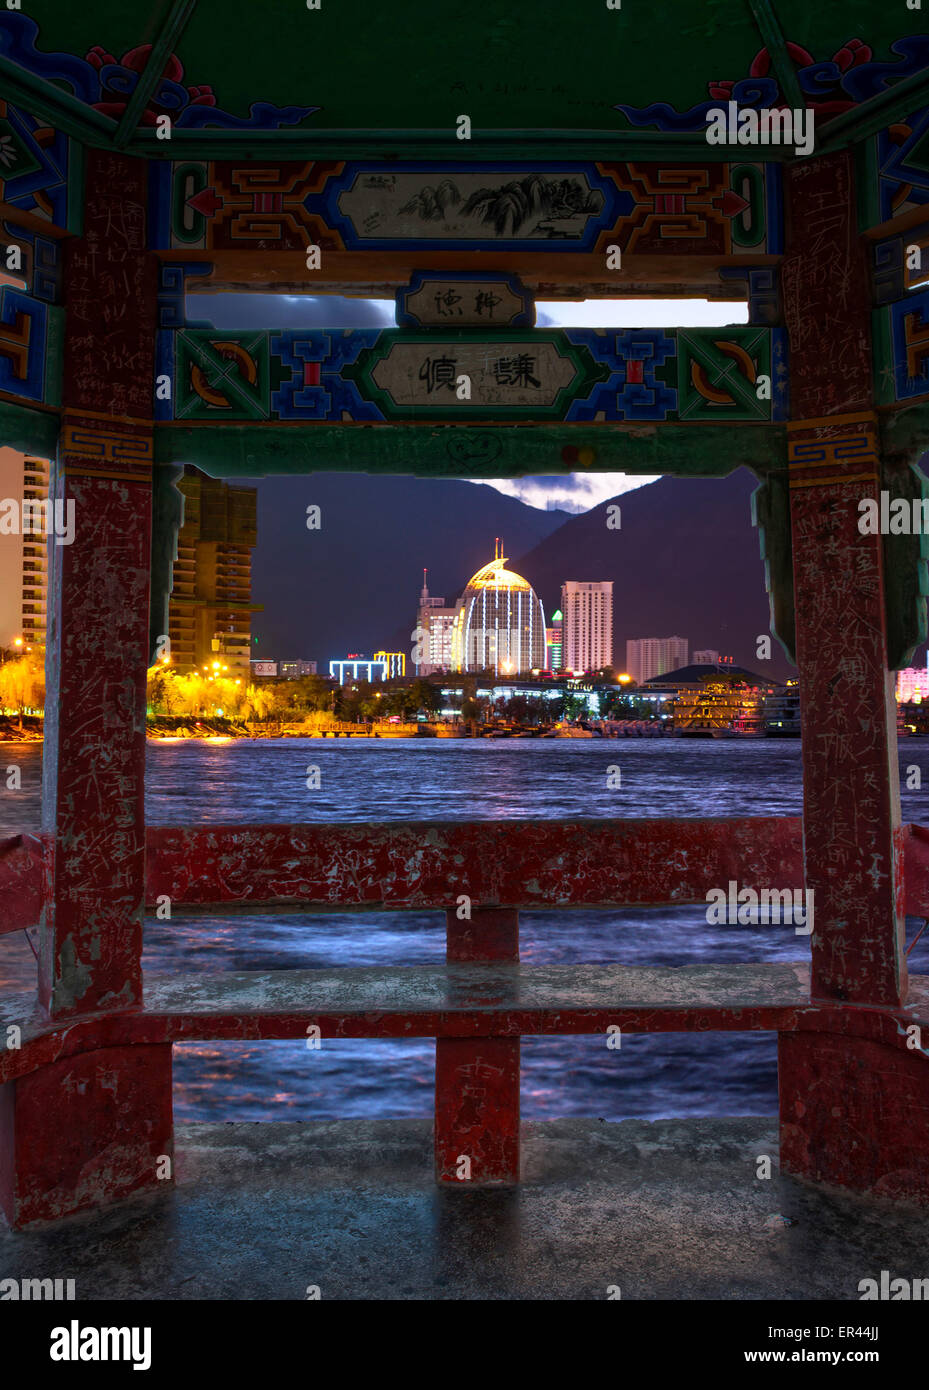 Dali, Yunnan, CHN. 5th Jan, 2015. Dali, CHINA - Jan 09 2015: (EDITORIAL USE ONLY. CHINA OUT) ï¼ˆPhoto has been processedï¼‰Erhai Lake at night. Erhai Lake is the largest highland lake next to Dianchi and one of the seven biggest fresh water lakes in China. ''Erhai'' means ''sea shaped like an ear'' in Chinese. Implying that the lake is ear shaped and as large as a sea, it was so named. The lake covers an area of 250 square kilometers and is located about 2 kilometers east of Dali. It is like a crescent lying between Cangshan and Dali city as seen from Cangshan Mount. In a sunny day, the cryst Stock Photo